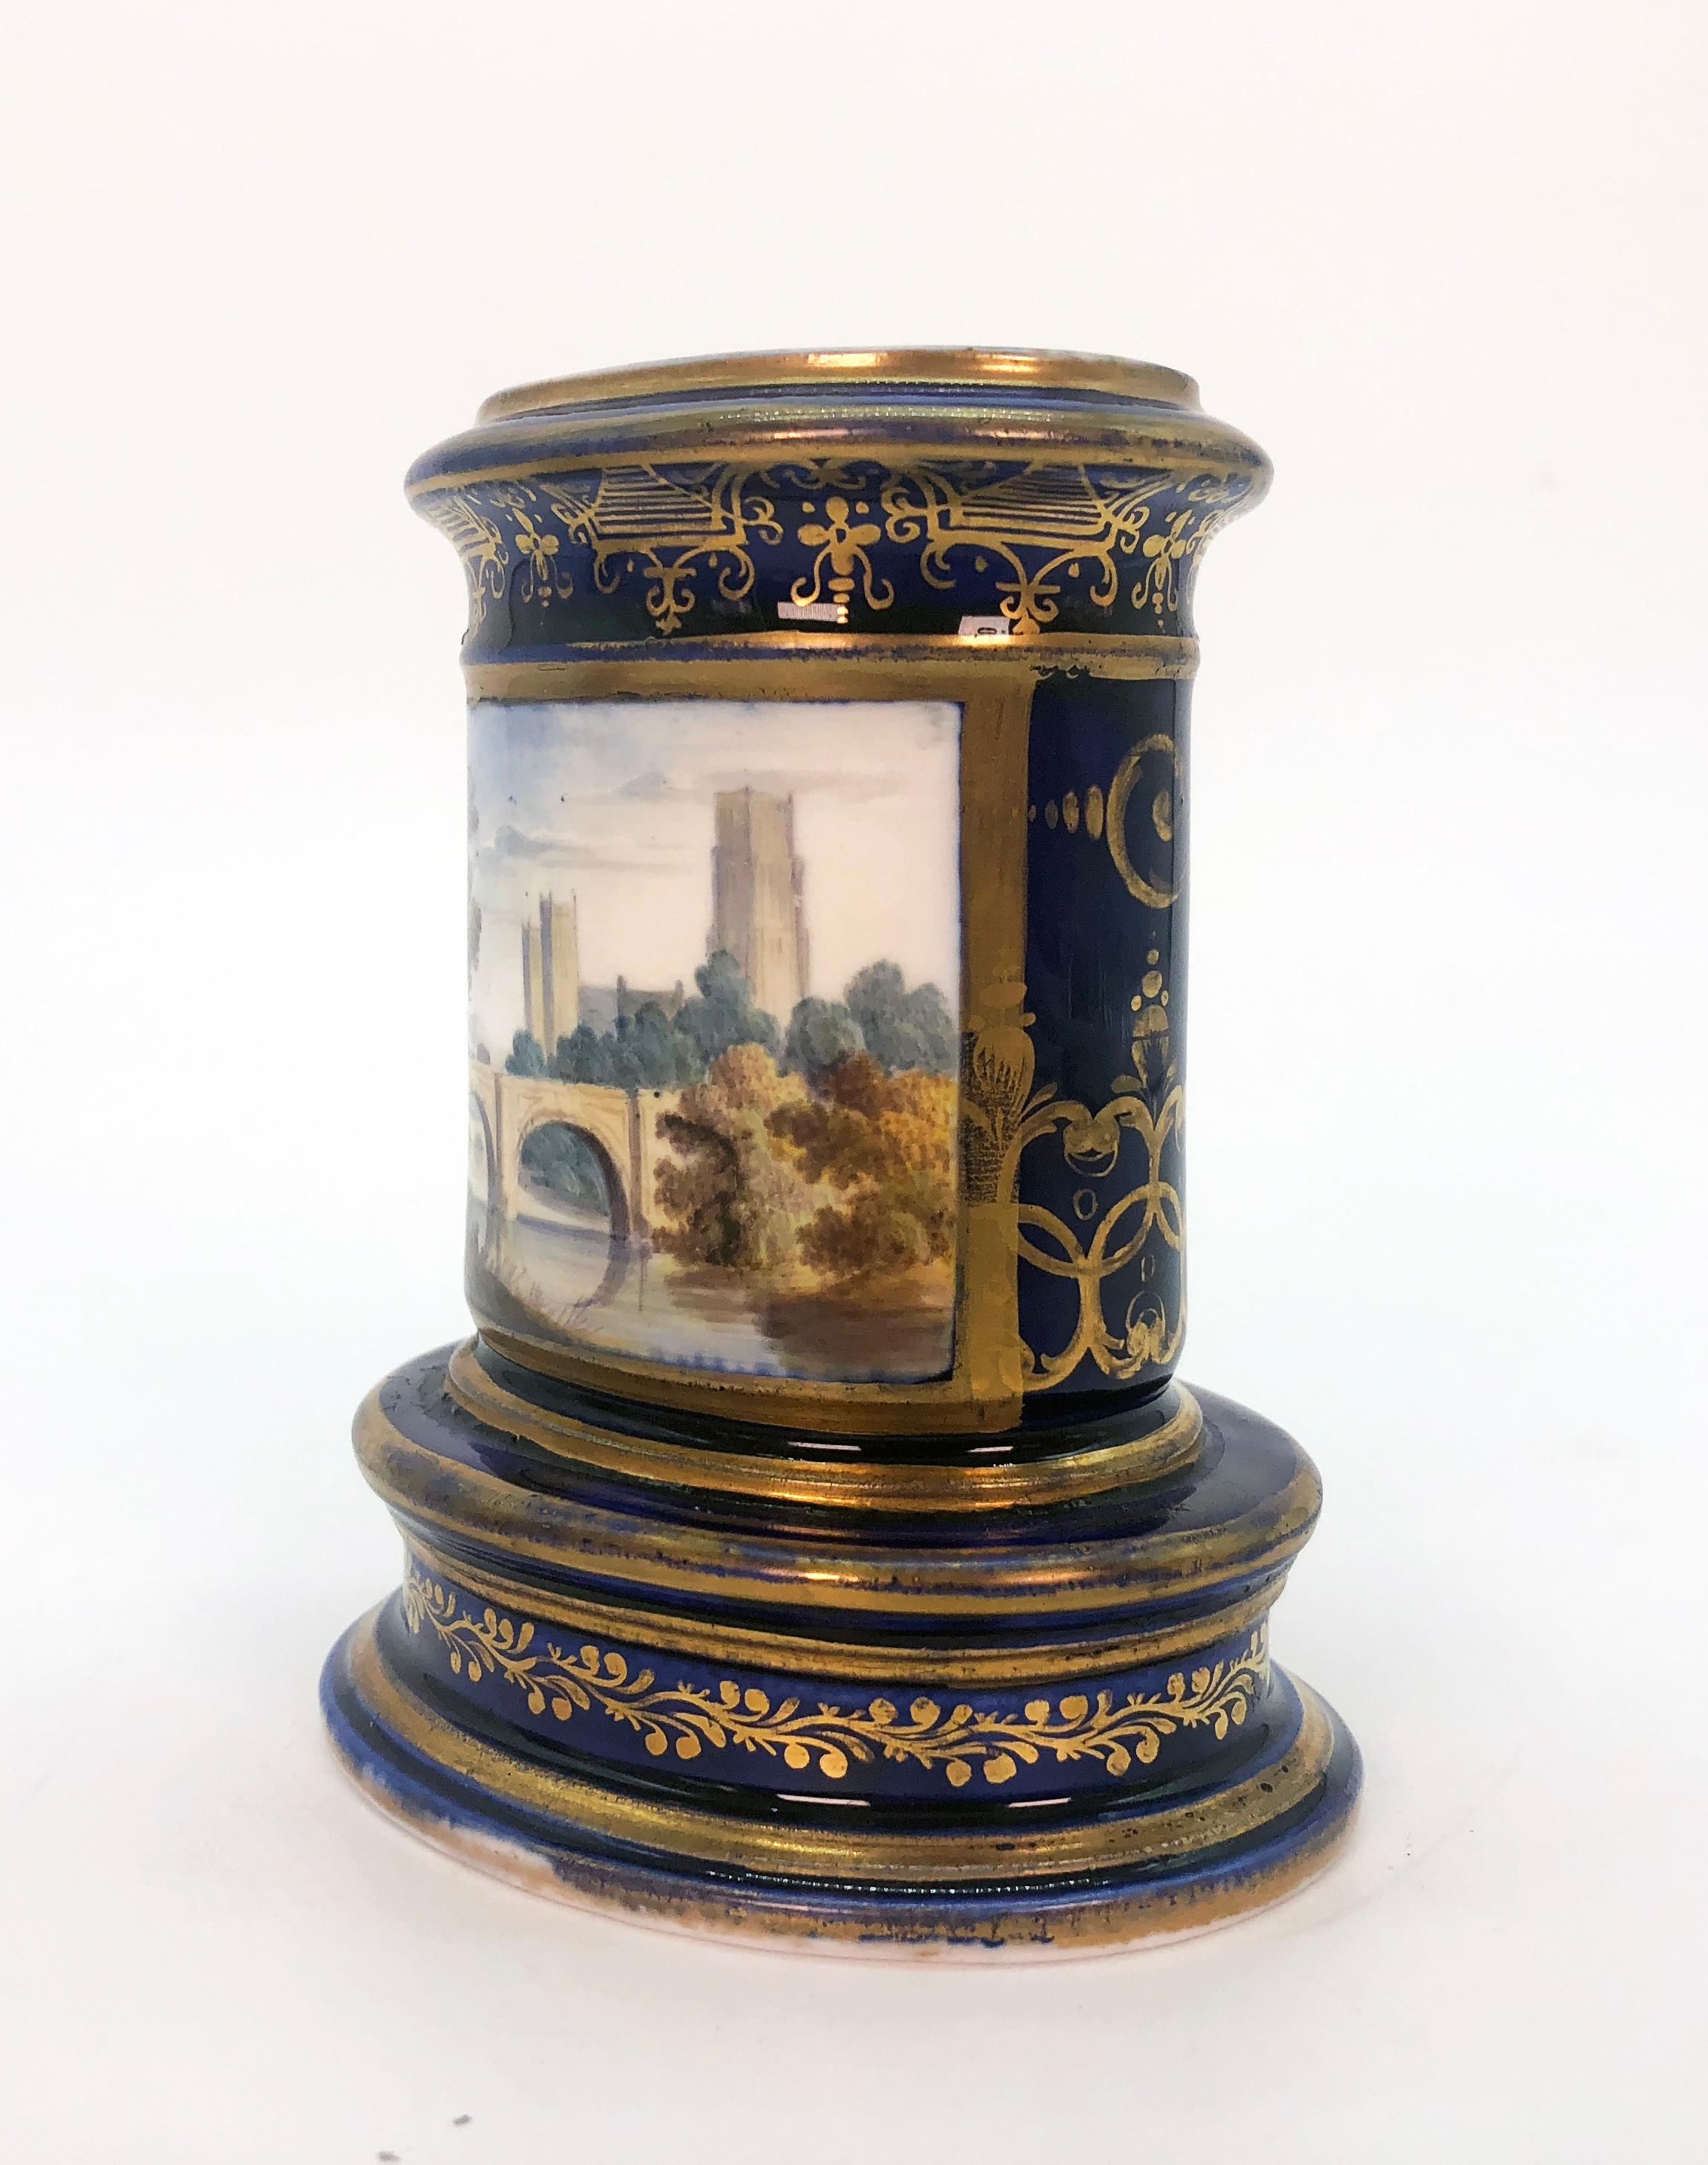 Pair of Spode spill vases, circa 1820. Cobalt blue and gilt with finely painted scenic panels, both depicting Cathedral City views. Marked to bases 'Durham/Spode' and 'The Cathedral and port of the city of Hereford/Spode' respectively. A spill vase